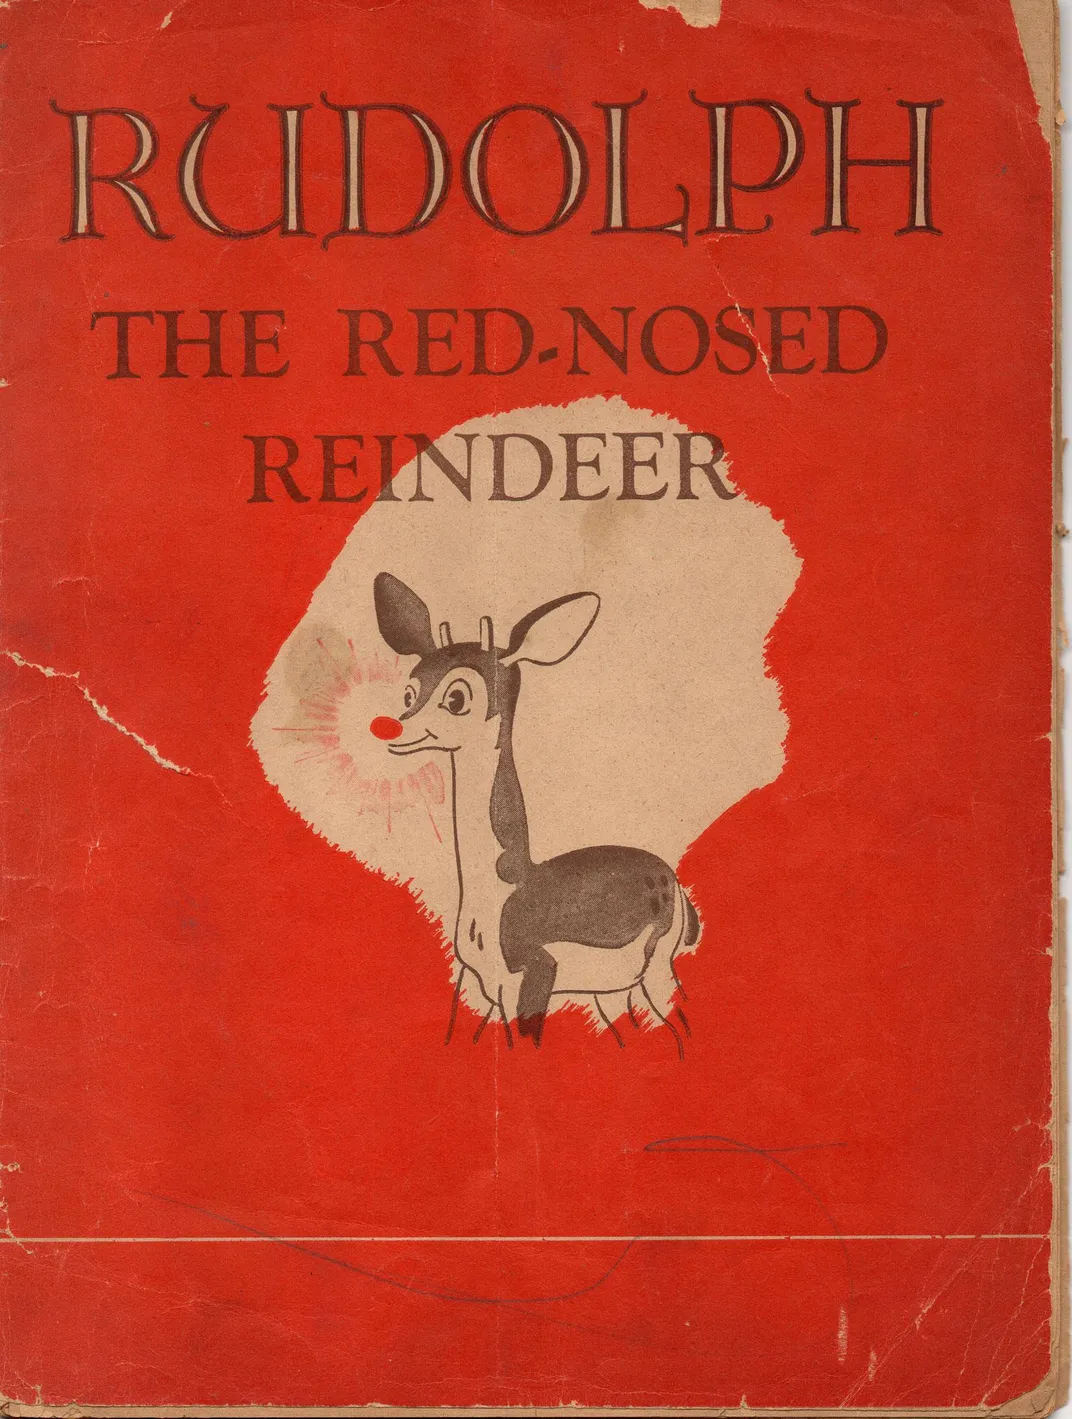 Cover of the 1939 Rudolph the Red-Nosed Reindeer coloring book